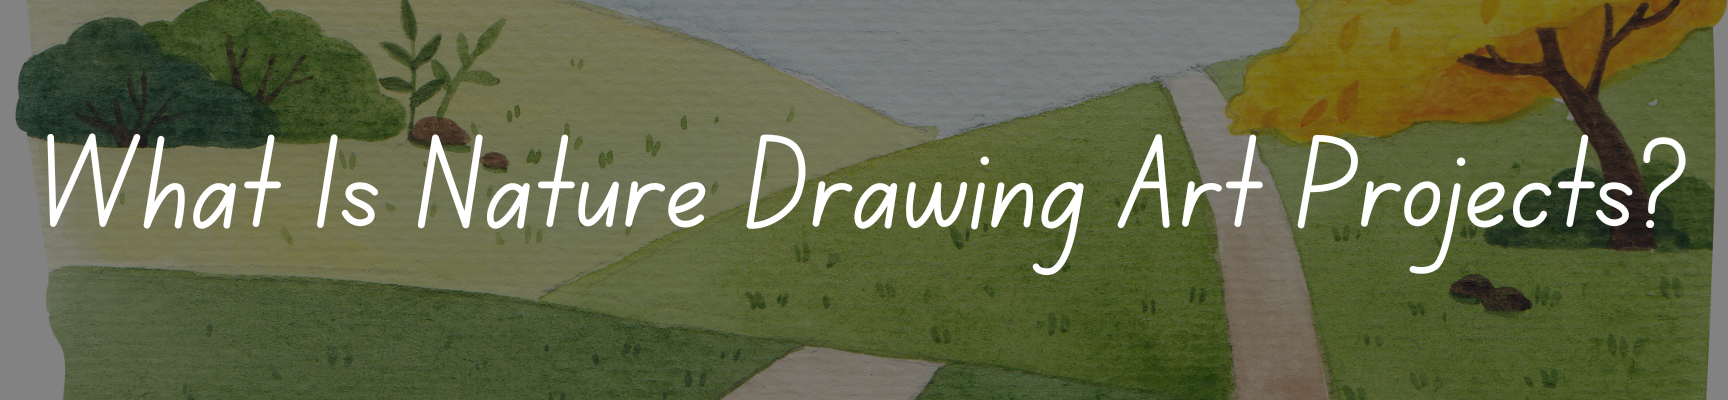 What Is Nature Drawing Art Projects?